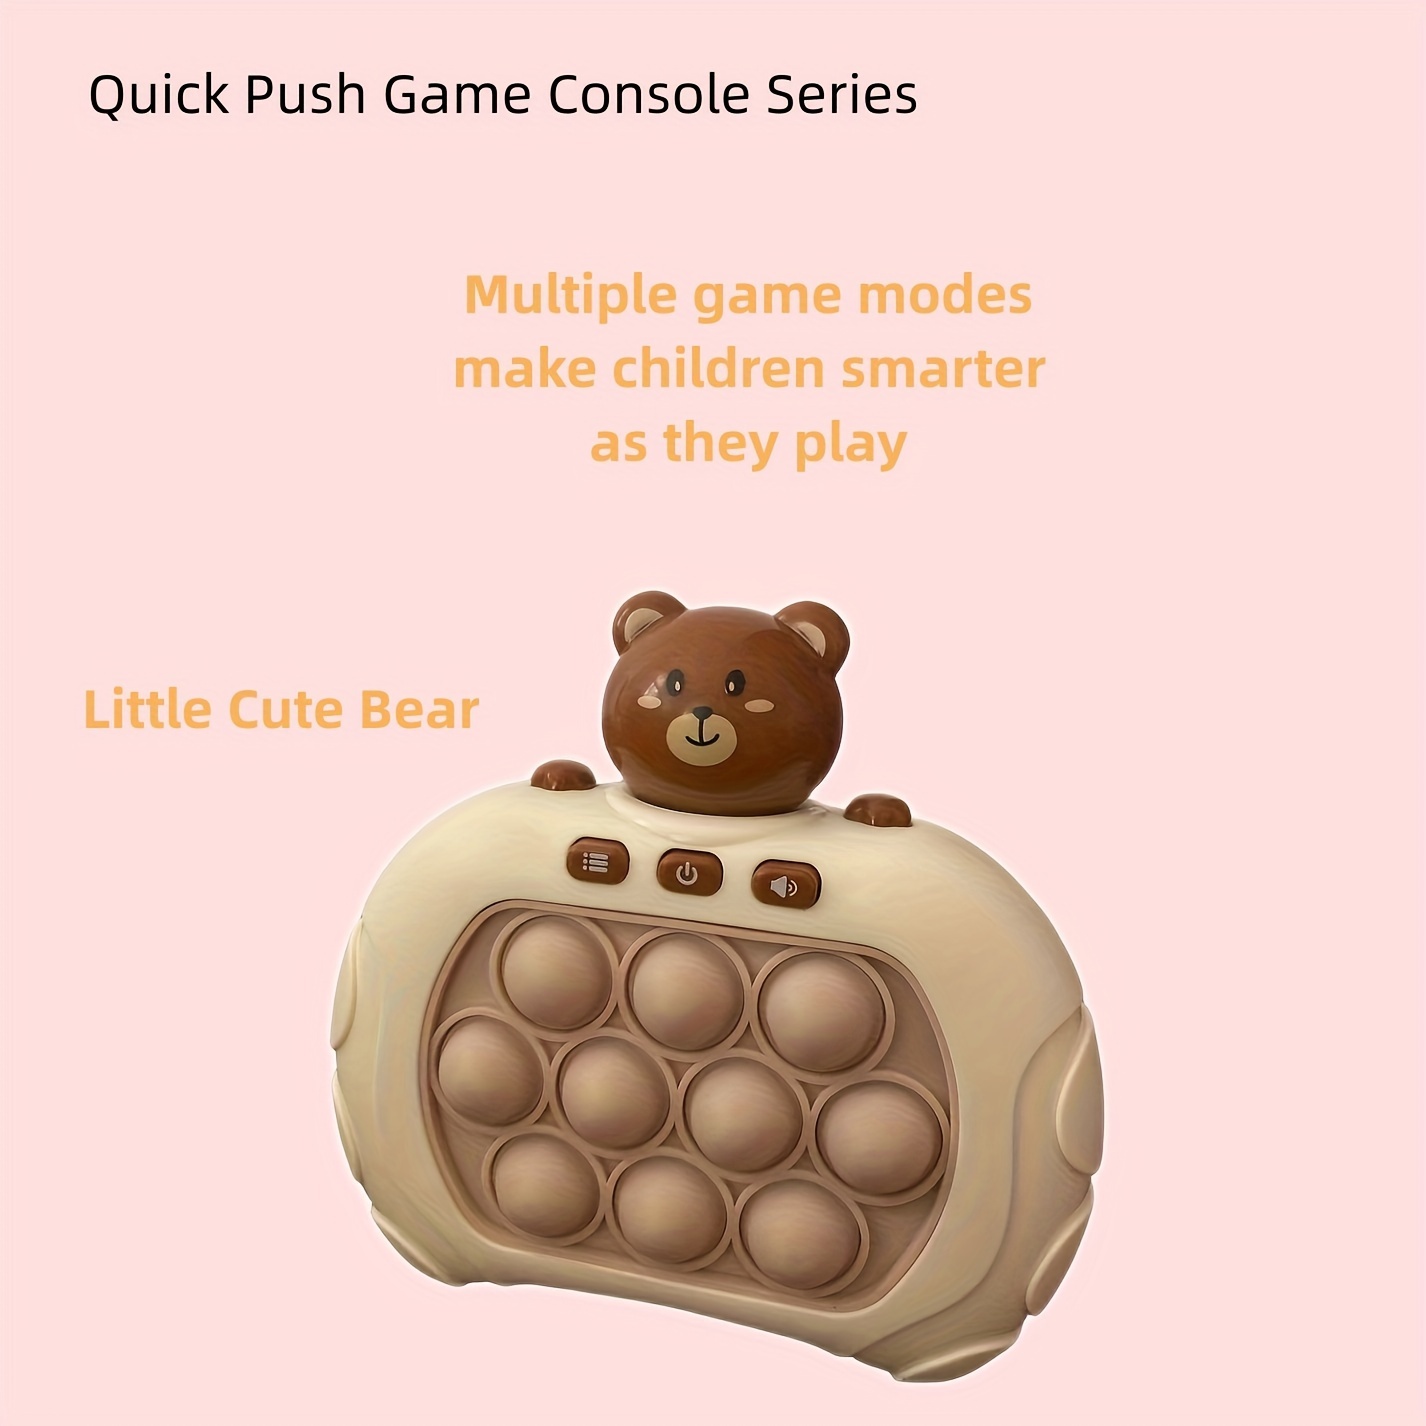  Pop Quick Push Game Console Series Toys for Kids